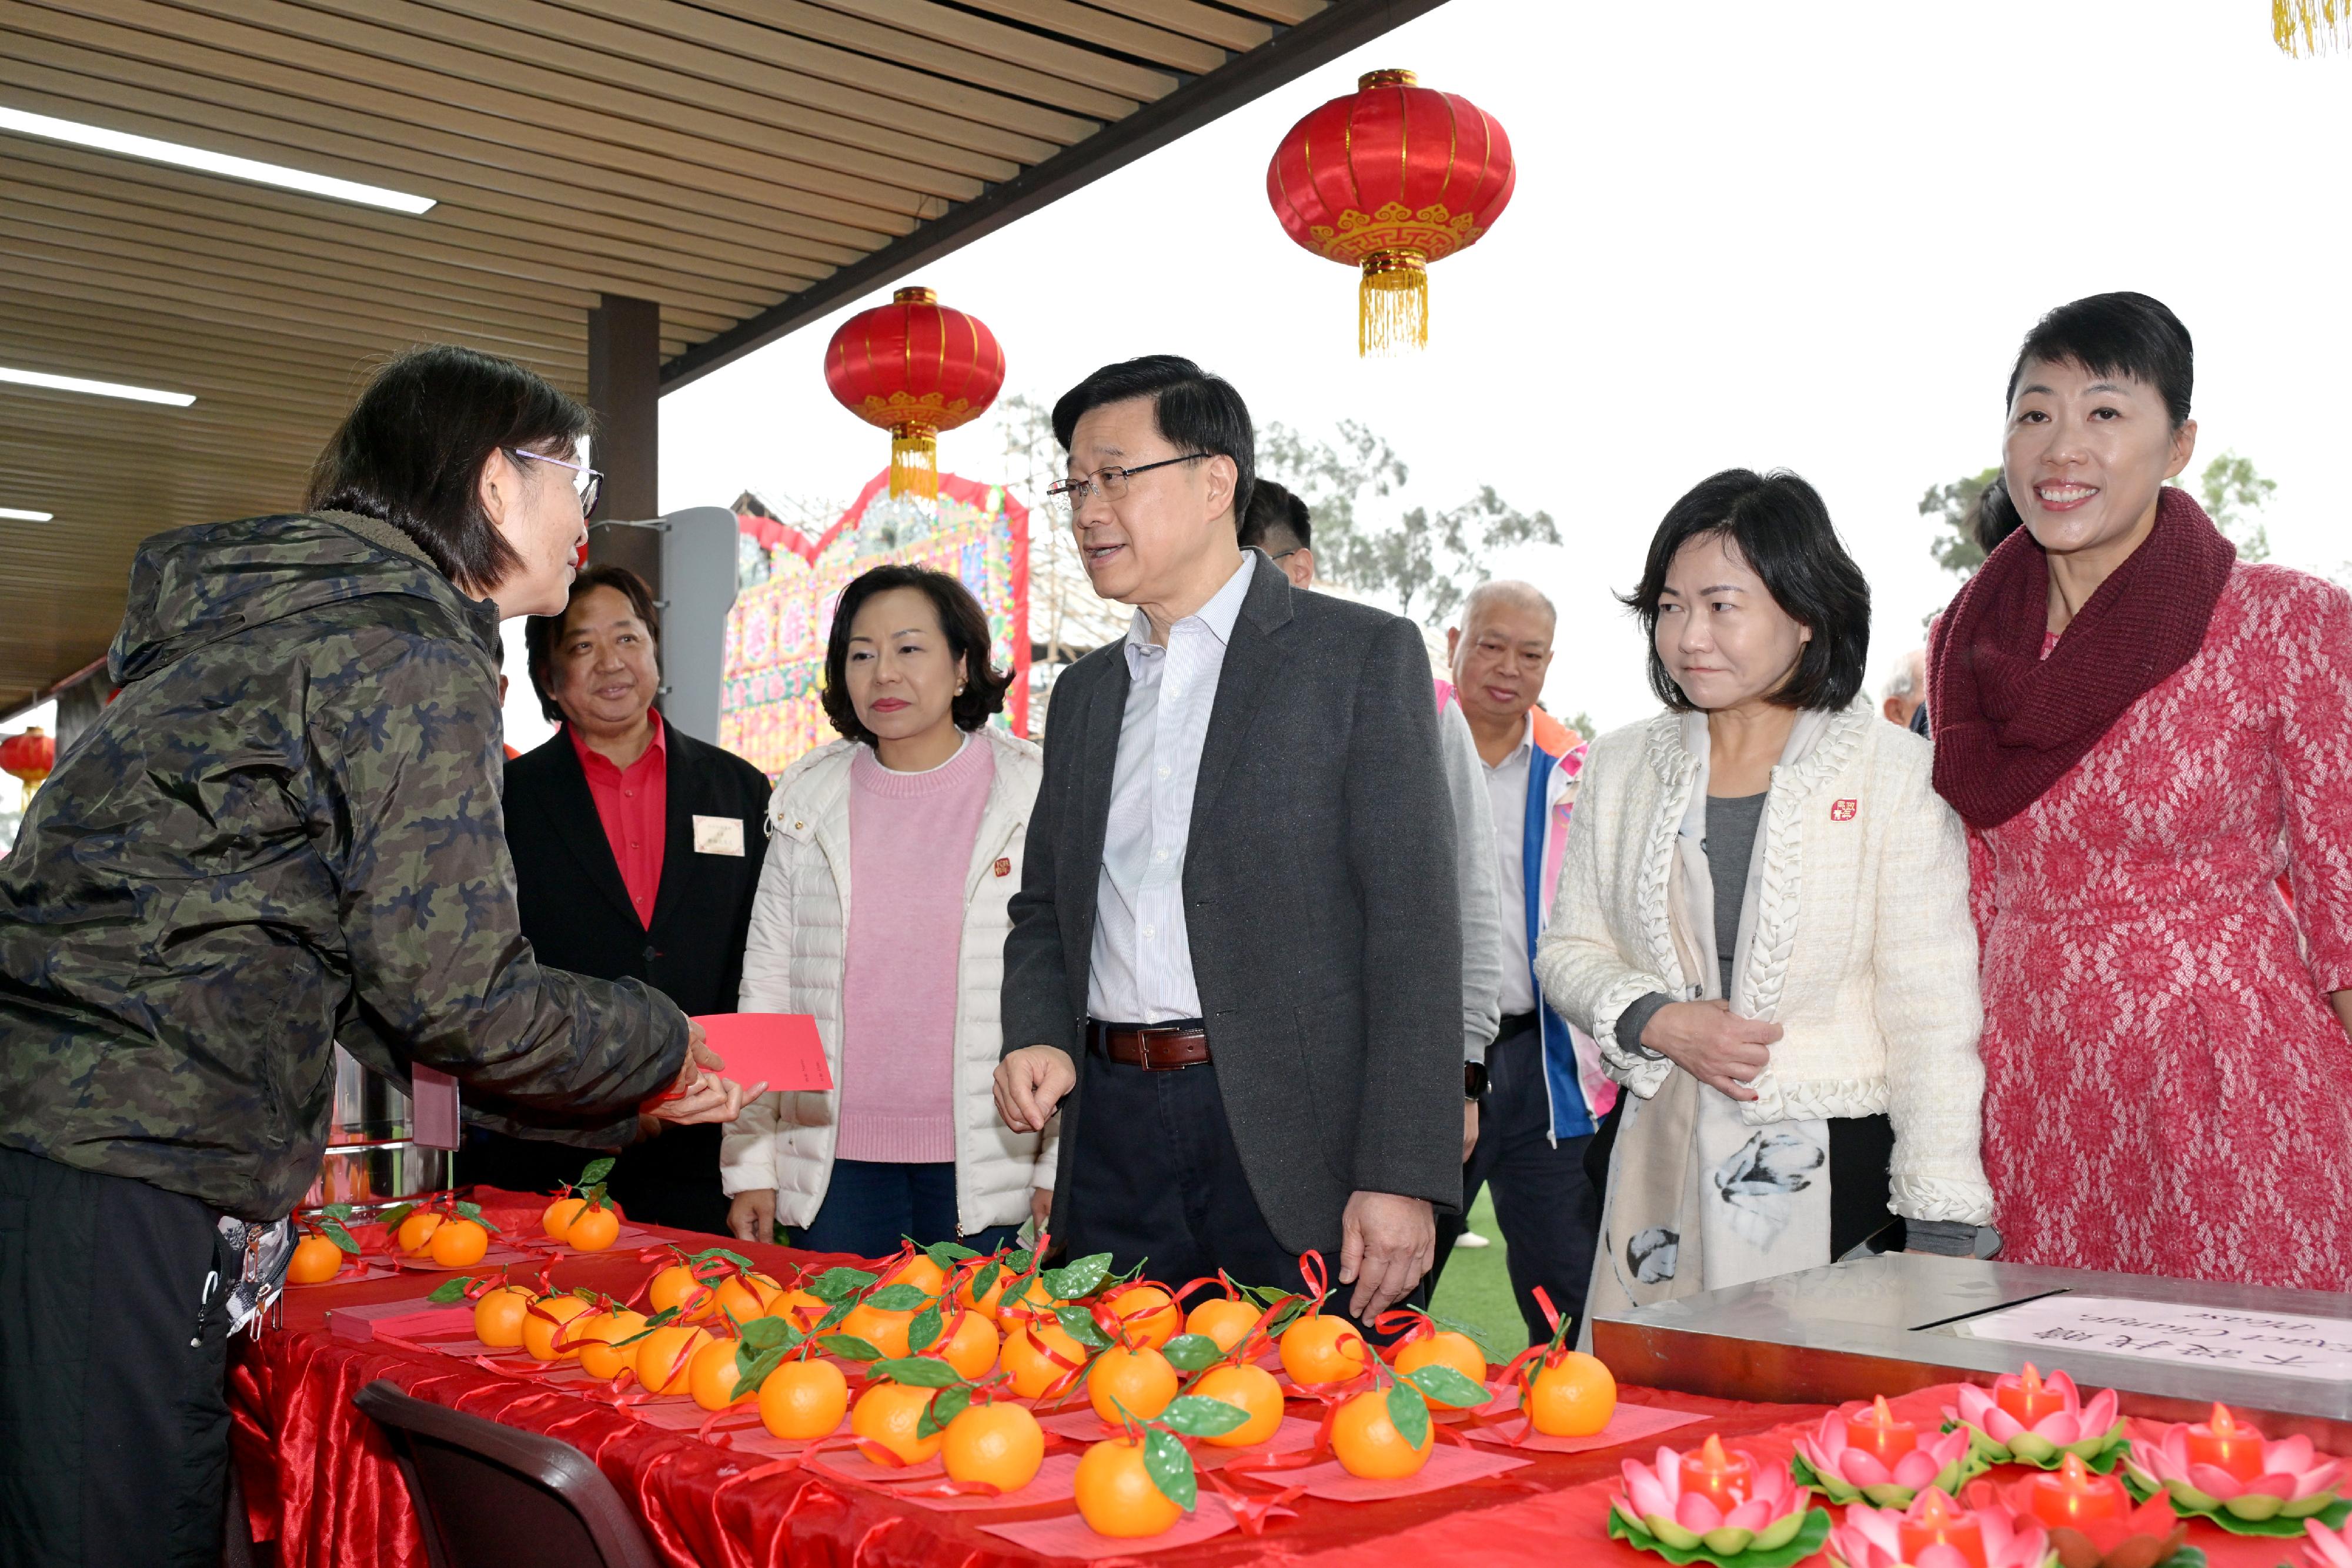 The Chief Executive, Mr John Lee, visited Tai Po today (February 7). Photo shows Mr Lee (front row, third right), chatting with a stall operator. Looking on are the Secretary for Home and Youth Affairs, Miss Alice Mak (front row, fourth right); the Director of Home Affairs, Mrs Alice Cheung (front row, second right); and the District Officer (Tai Po), Ms Eunice Chan (front row, first right).
